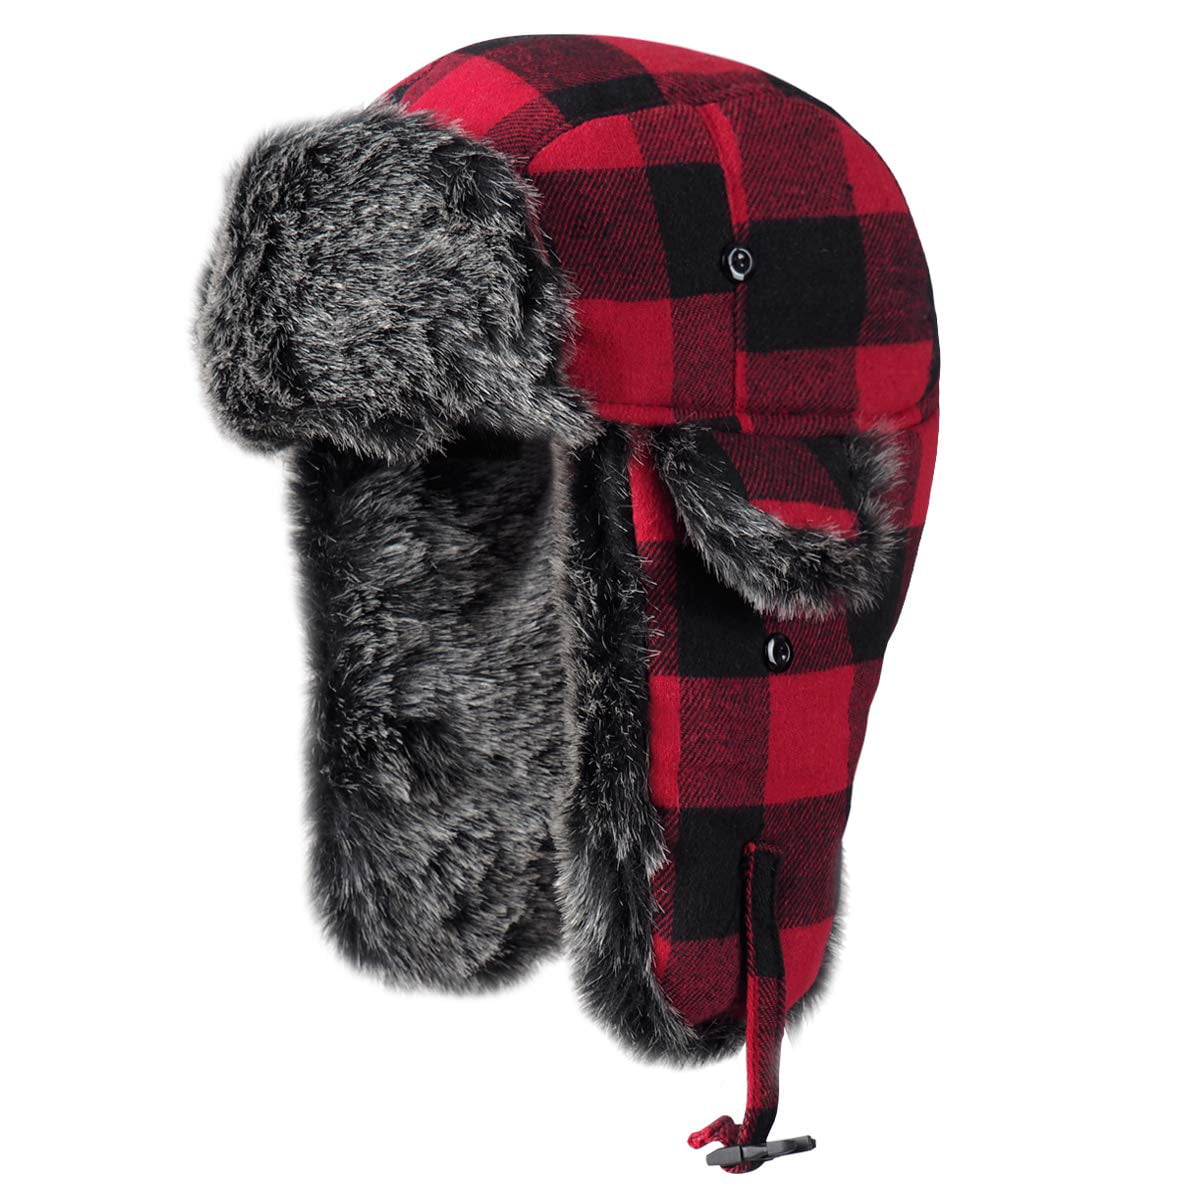 ONWAY Aviator Winter Hats for Men Bomber Hat with Faux Fur Ear Flaps, Red  Black Plaid Trapper Hat - Walmart.com